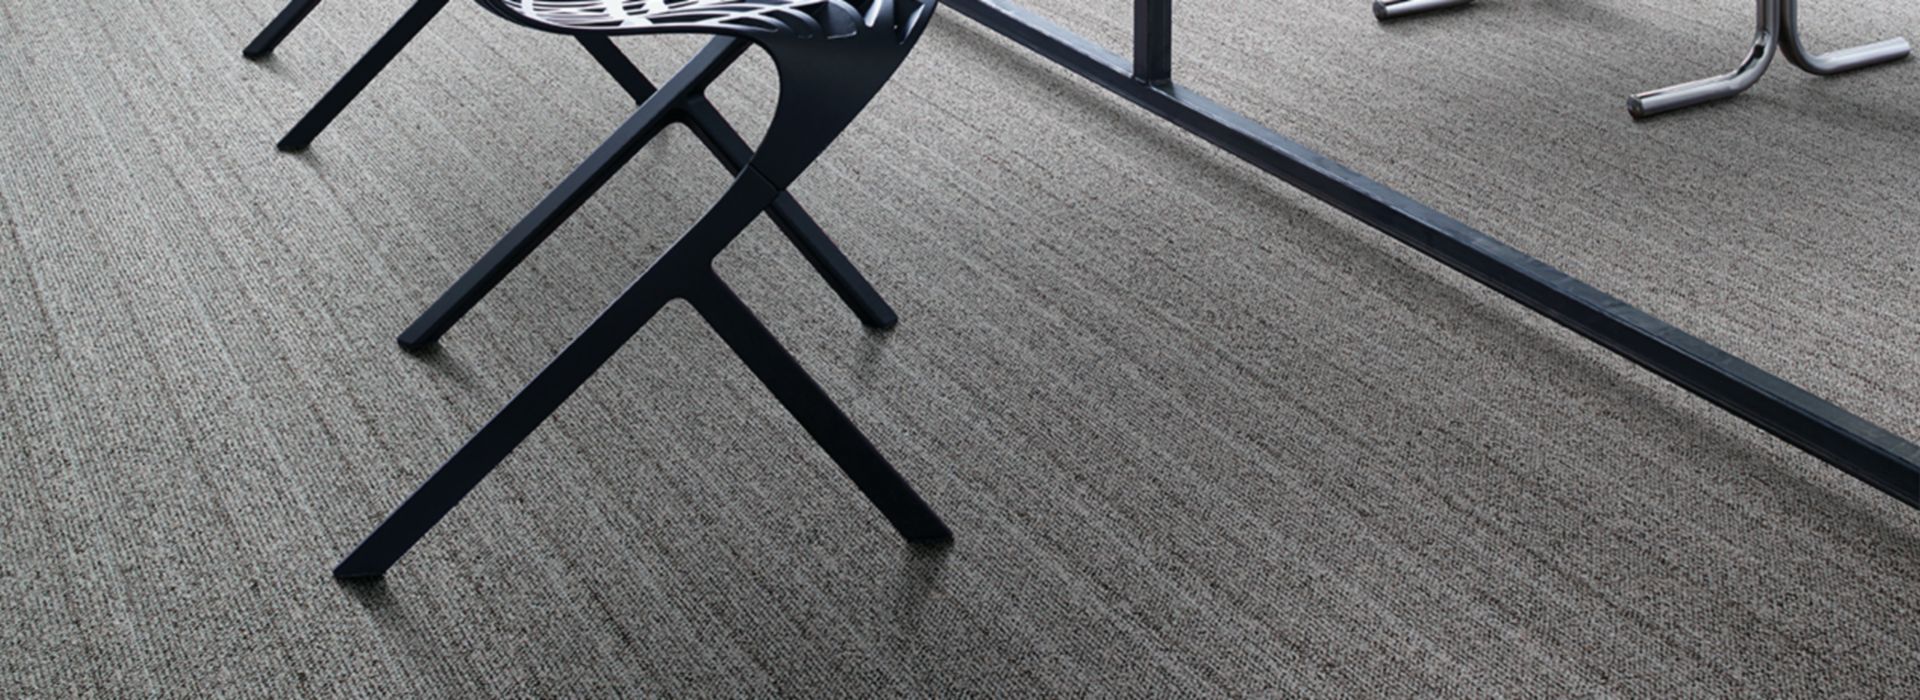 Interface WW860 plank carpet tile in work area with table and chairs número de imagen 1